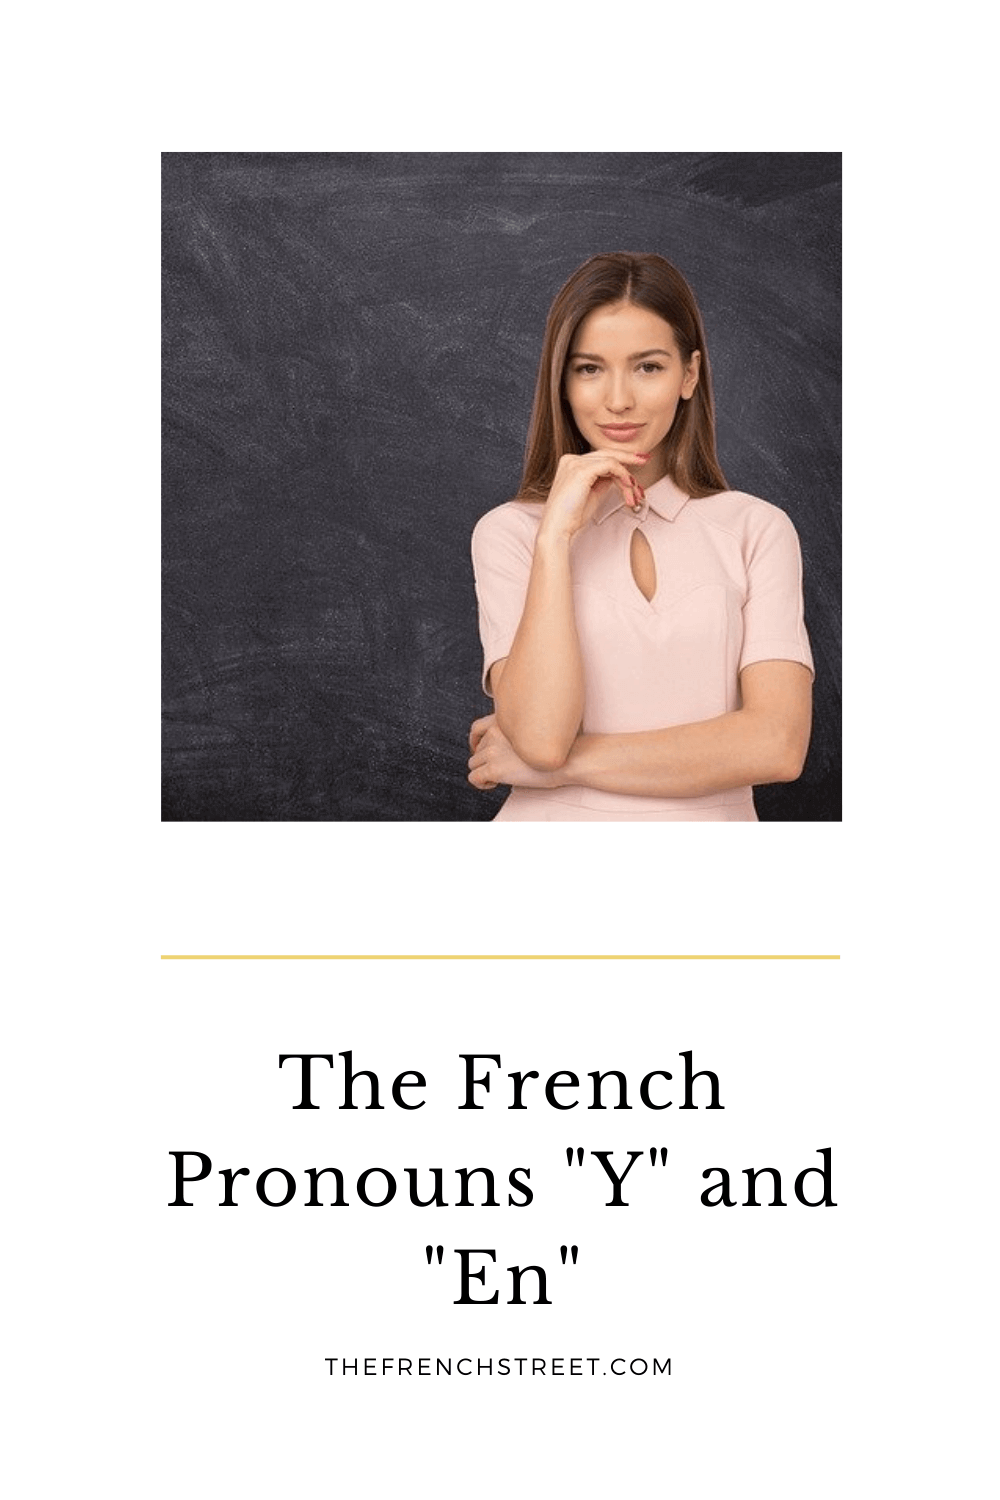 The French pronouns y and en.